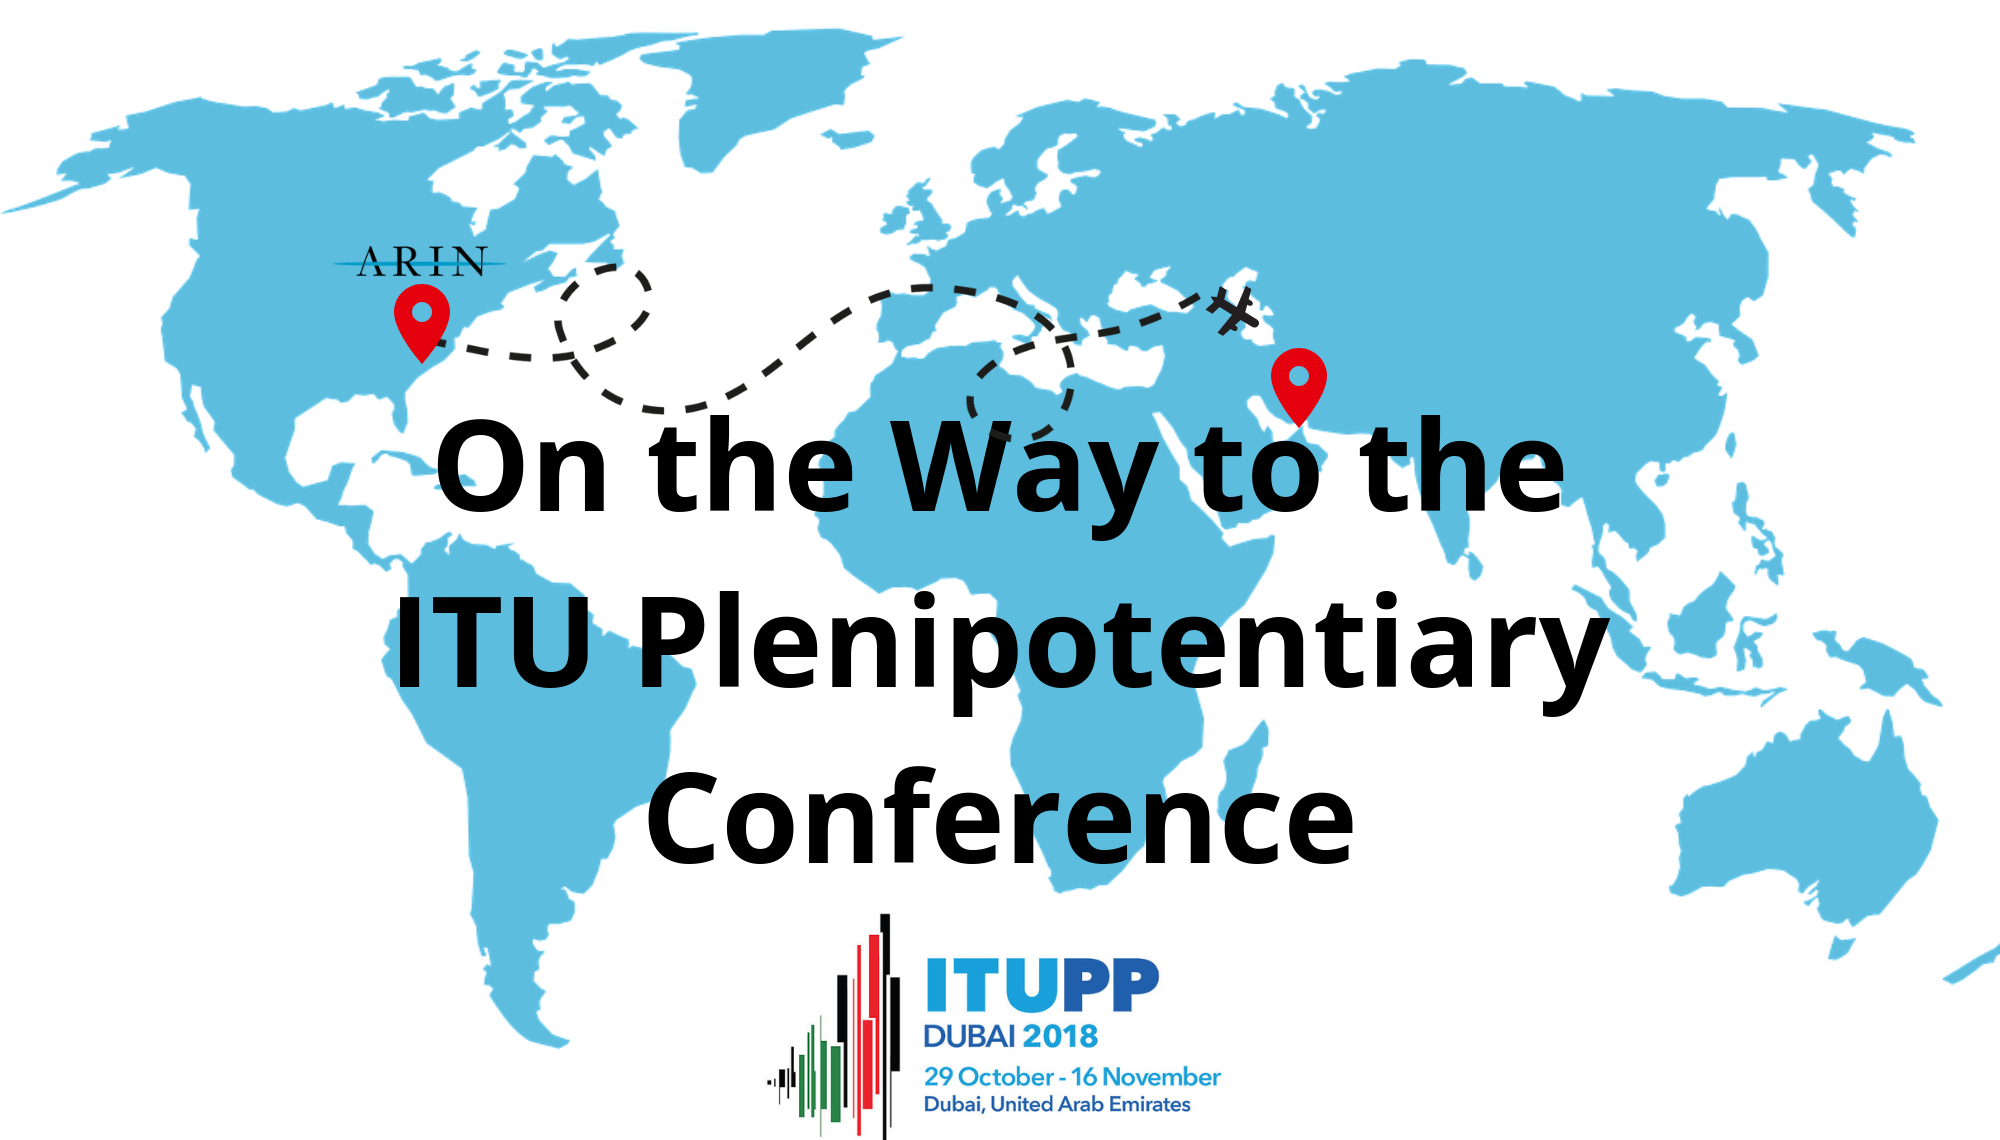 On the Way to the ITU Plenipotentiary Conference (PP18): The Americas Region Work on Common Proposals